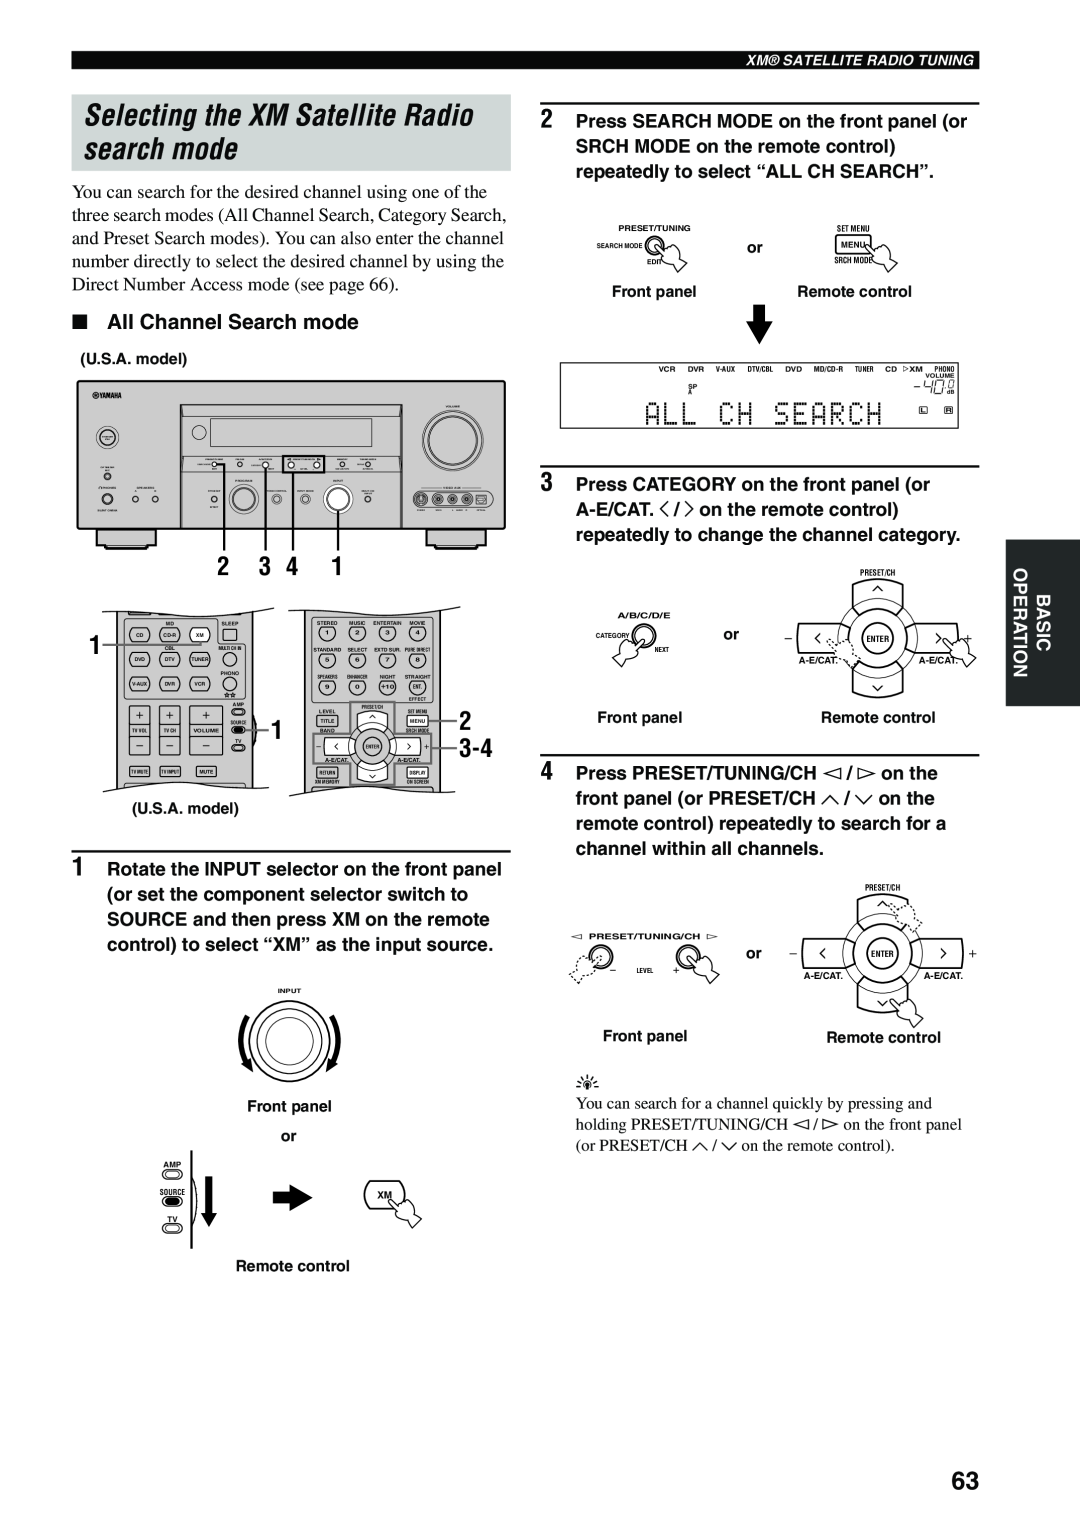 Yamaha HTR-5960 owner manual Selecting the XM Satellite Radio search mode, 2 3 4, All Channel Search mode 